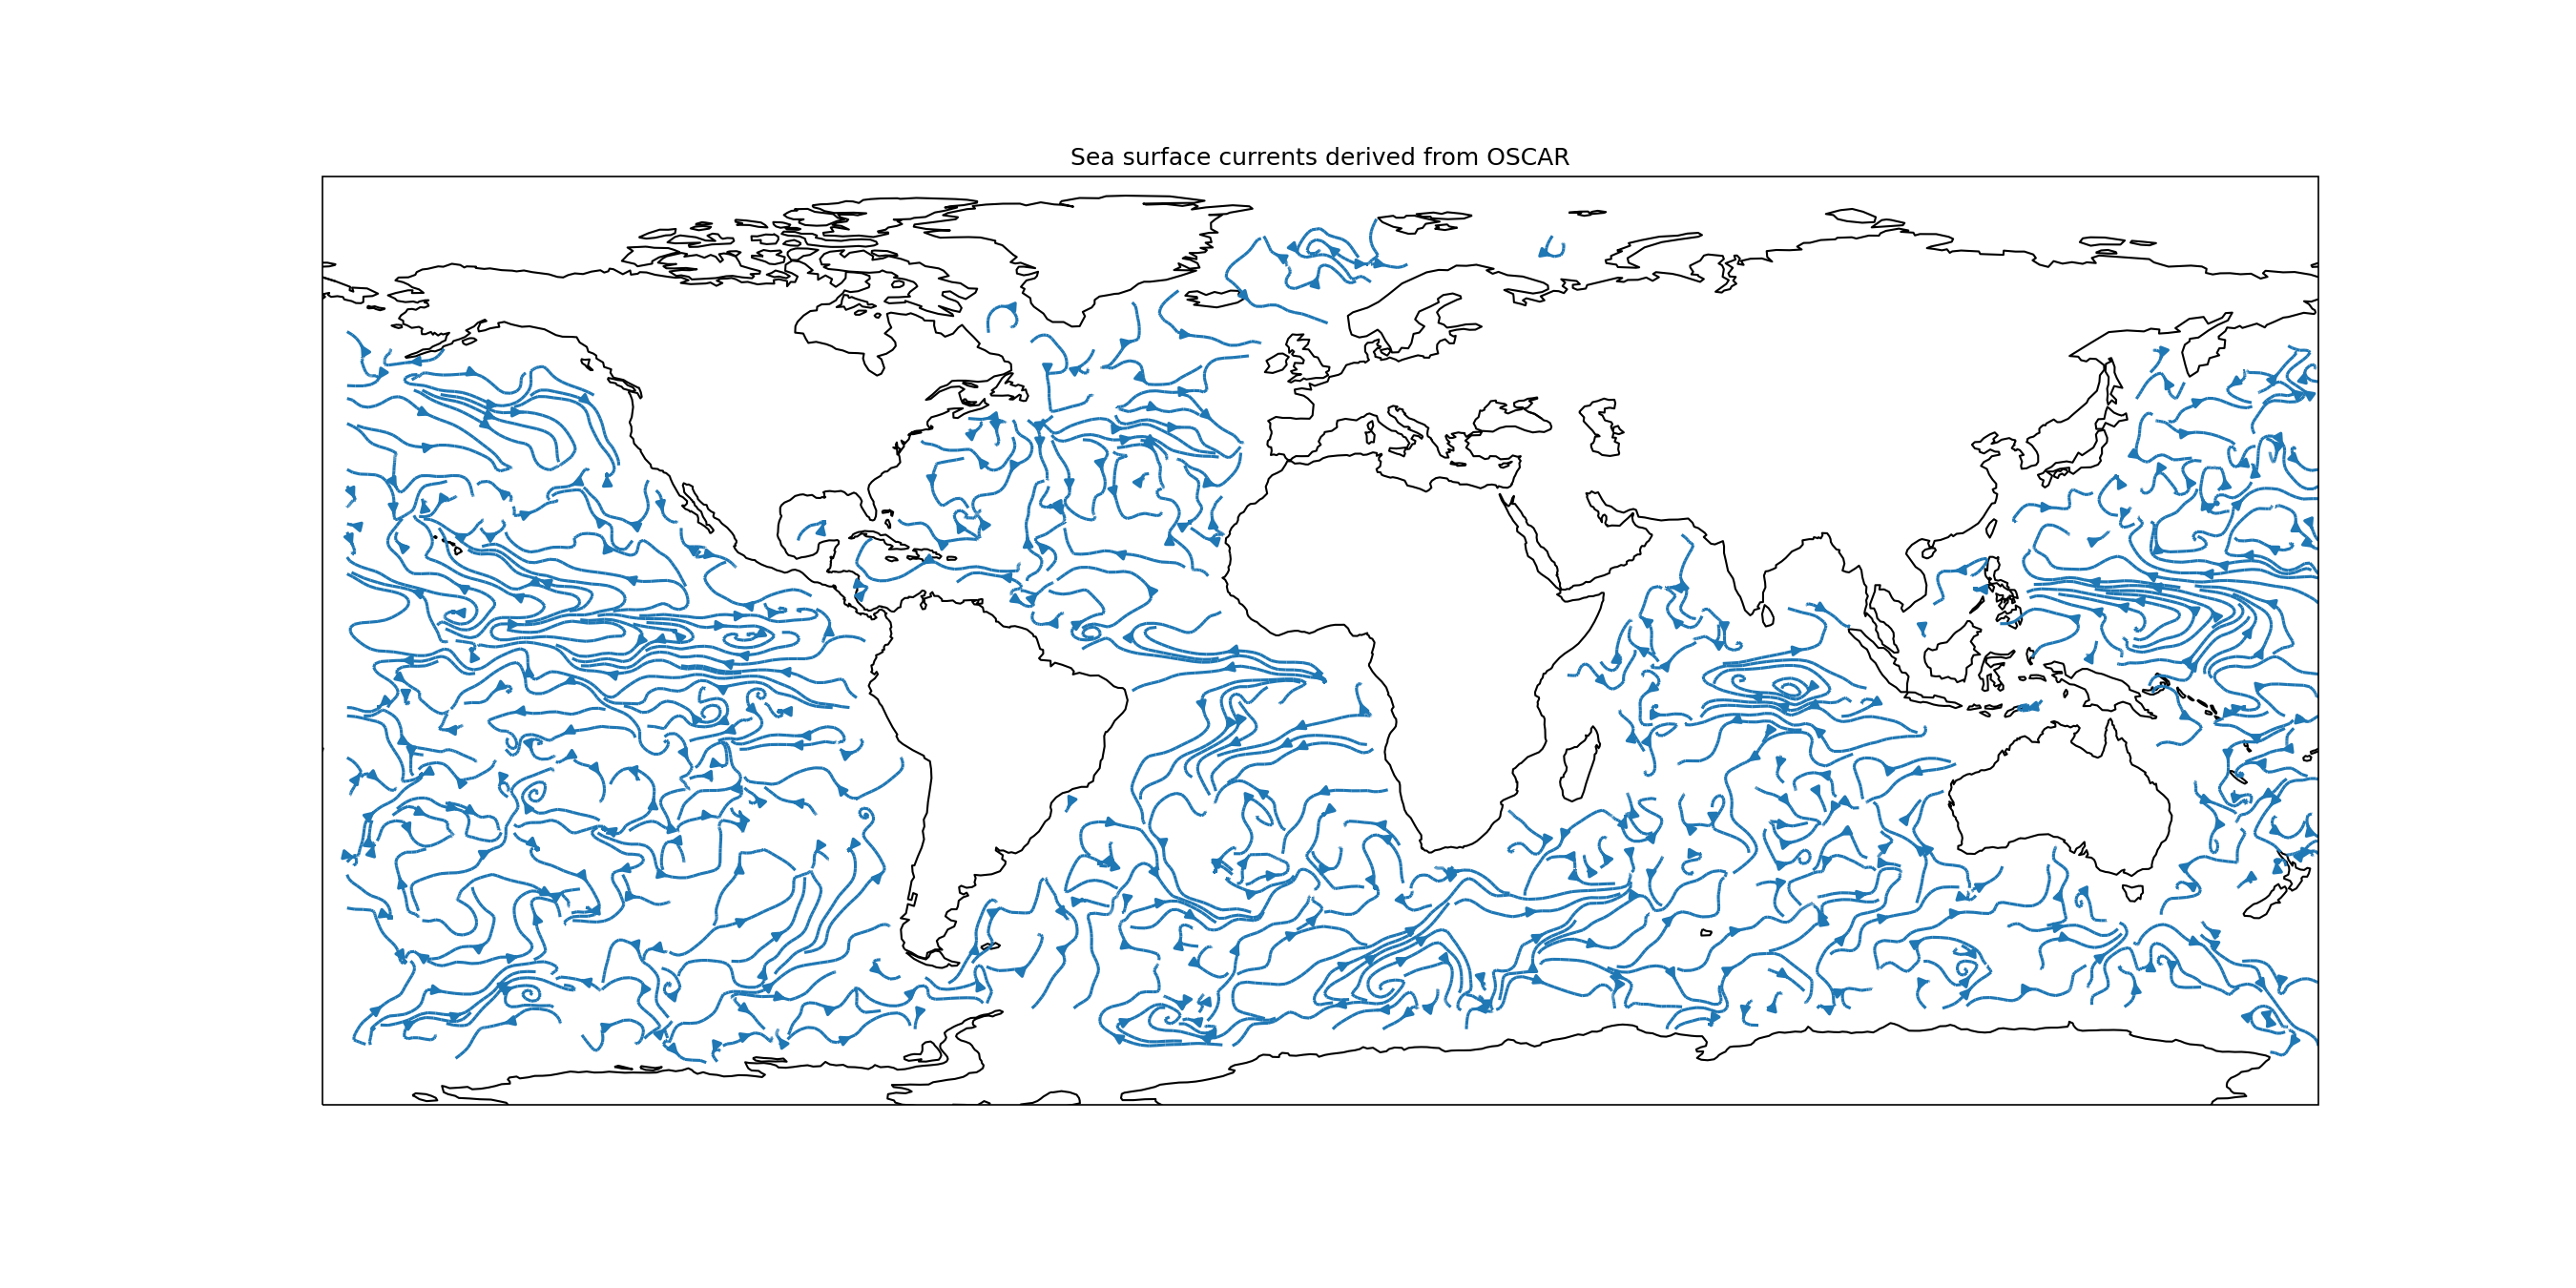 Sea surface currents derived from OSCAR